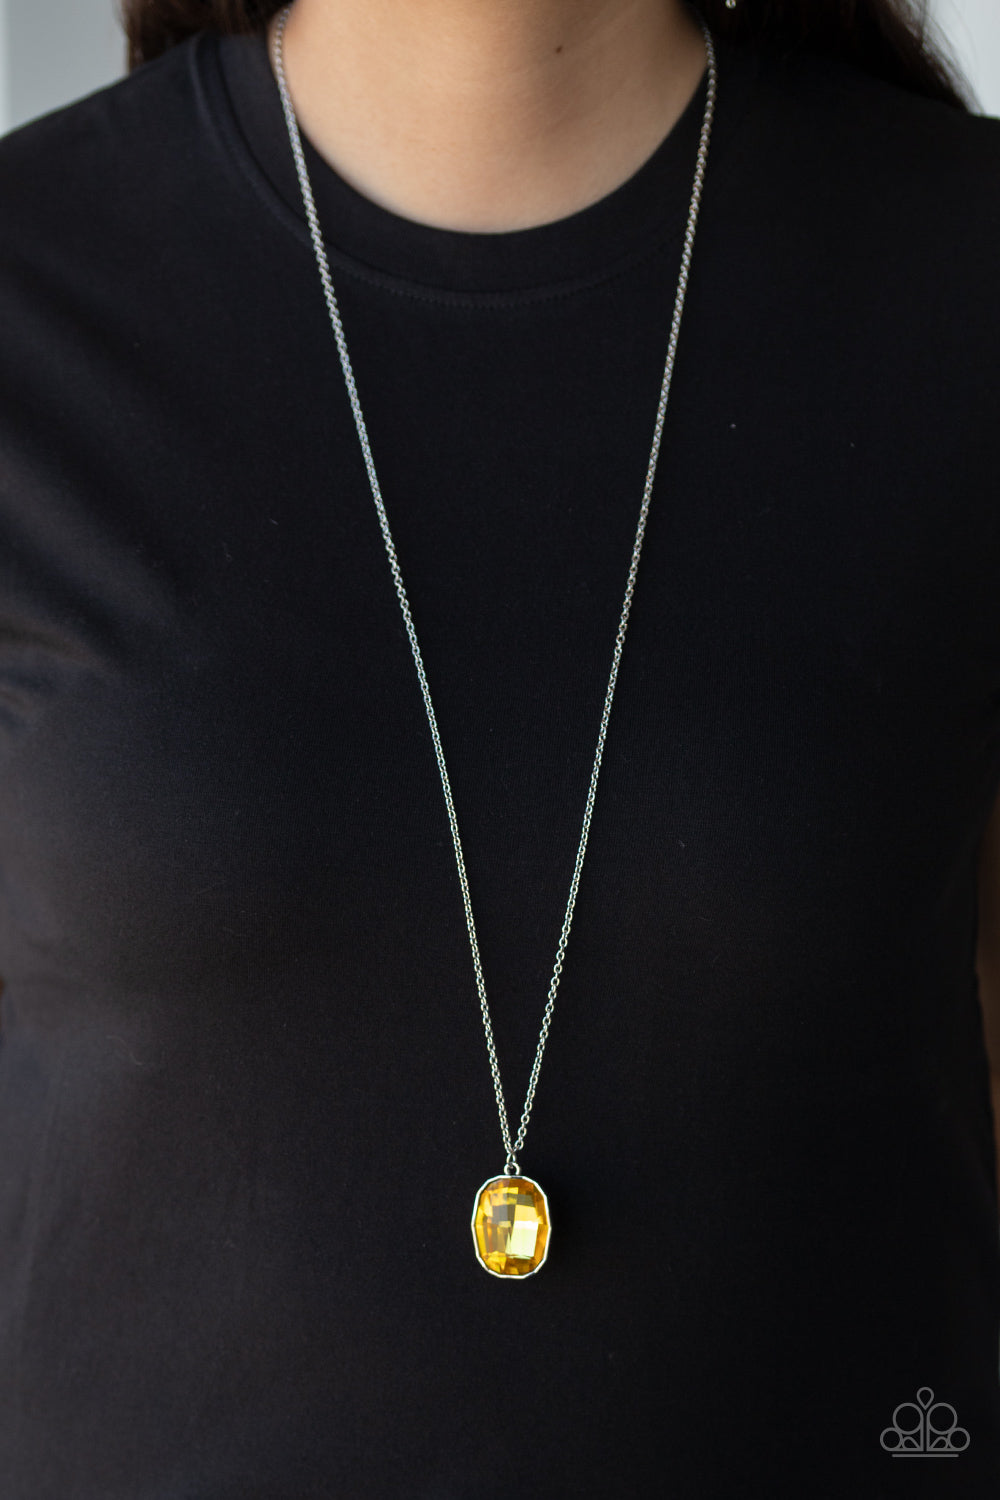 Imperfect Iridescence - Yellow Necklace 1314n